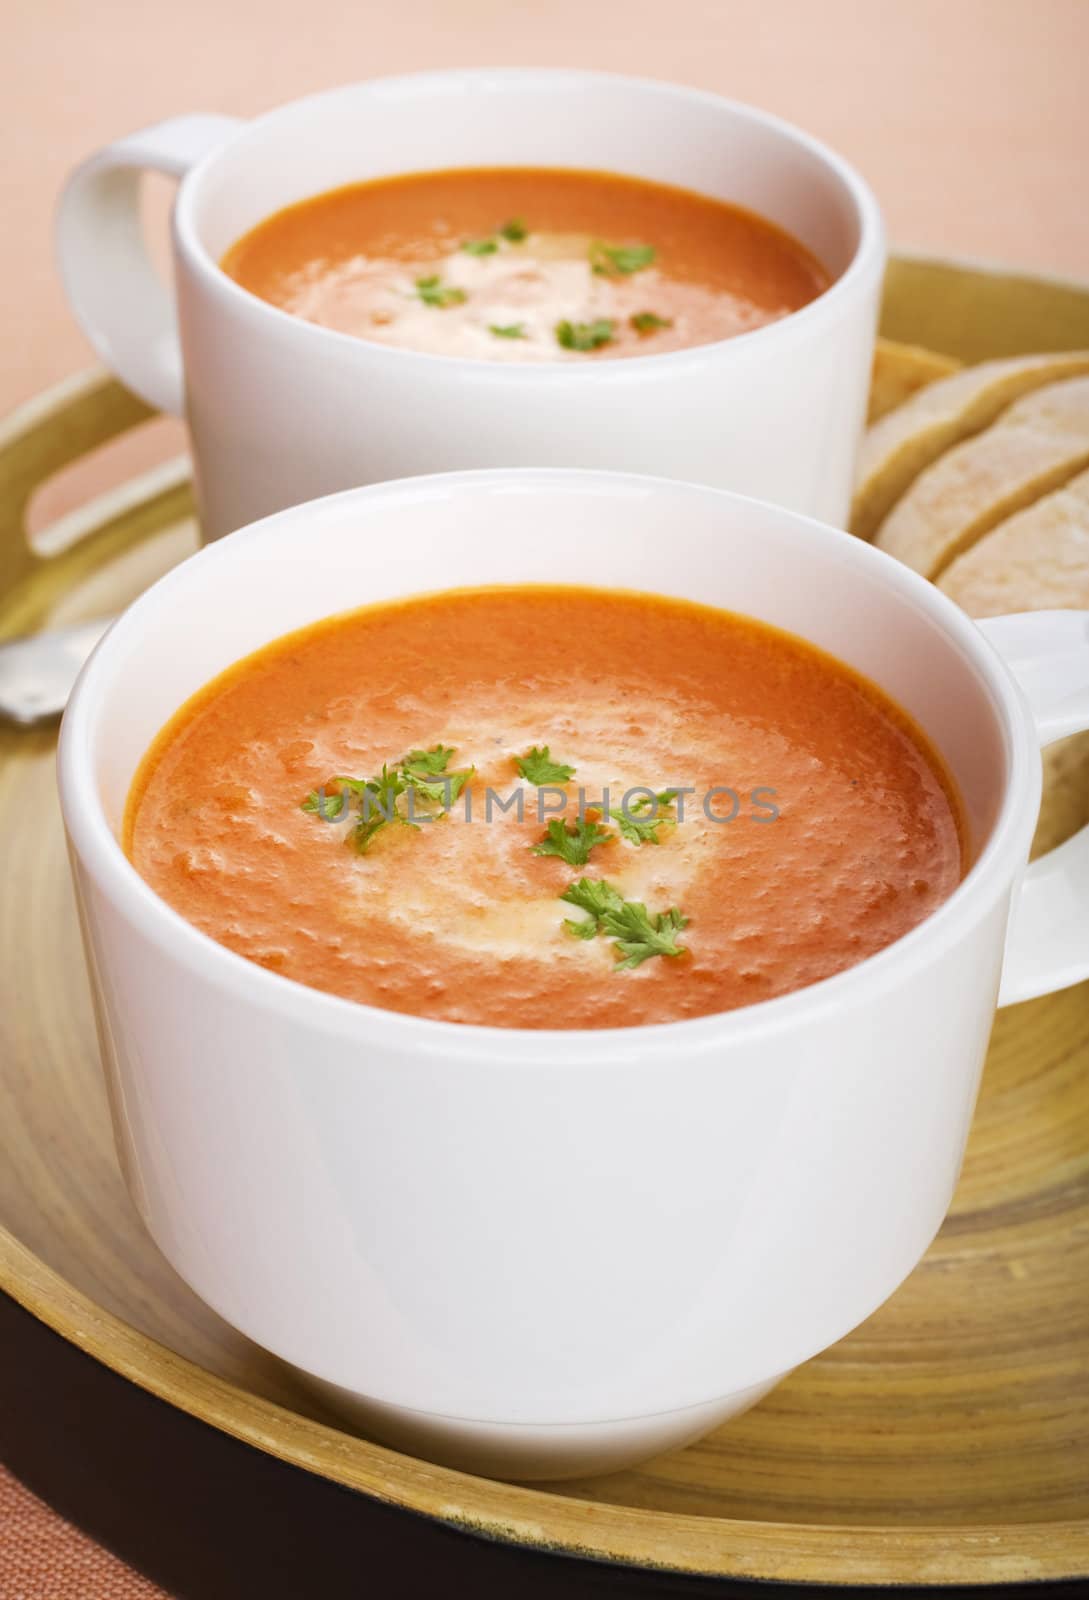 Two mugs of tomato soup with a swirl of cream and parsley, on a tray with bread.